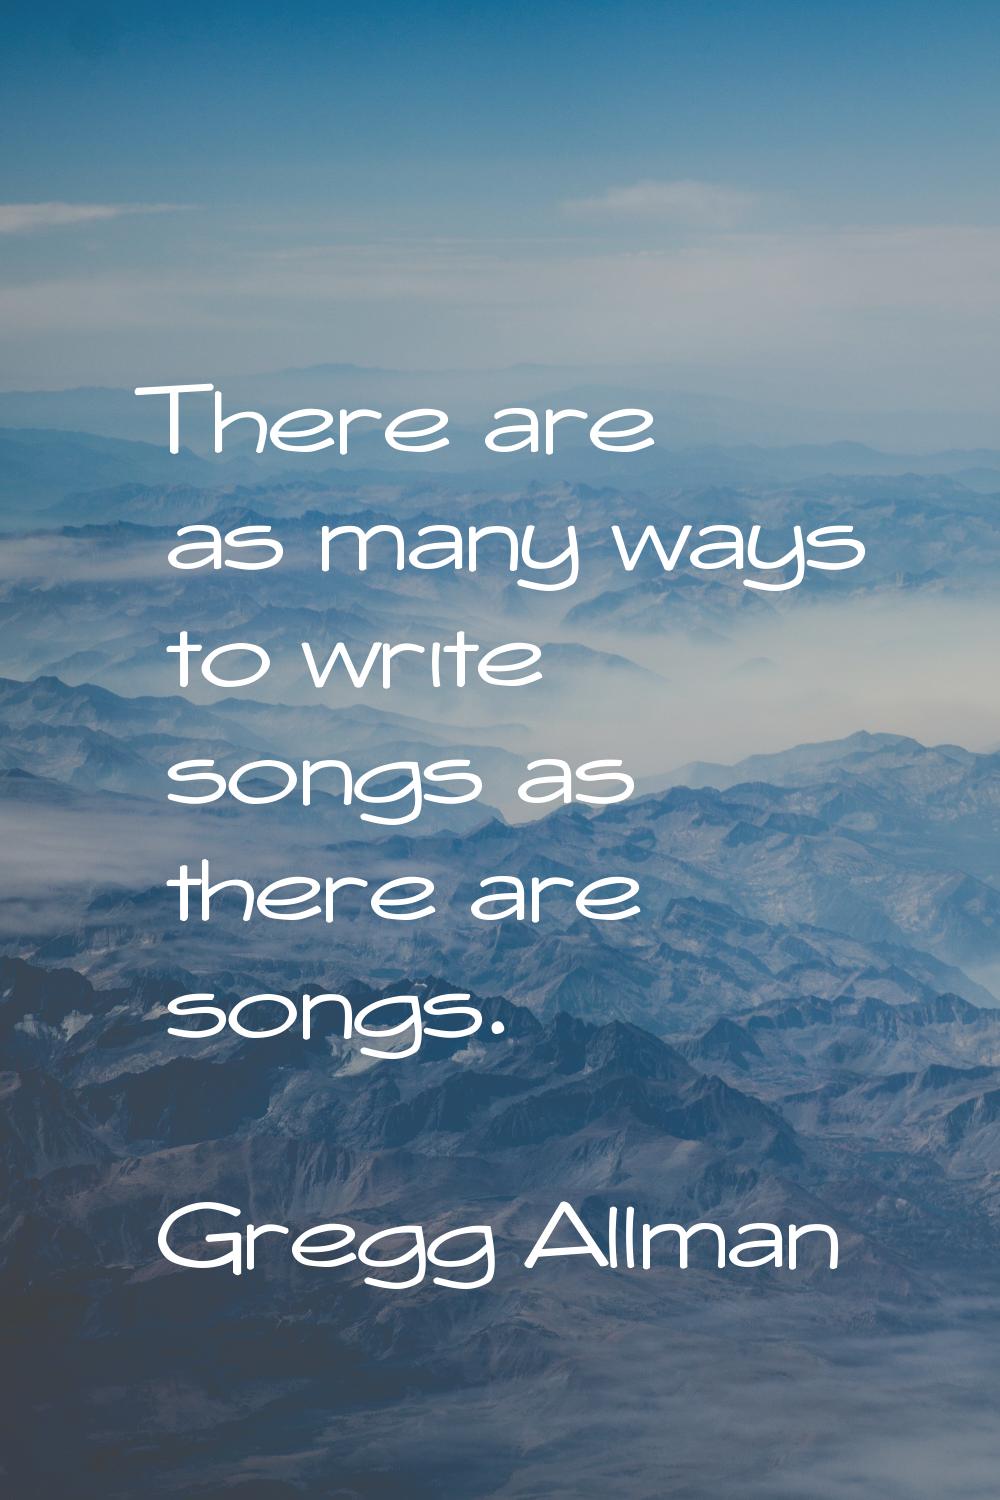 There are as many ways to write songs as there are songs.